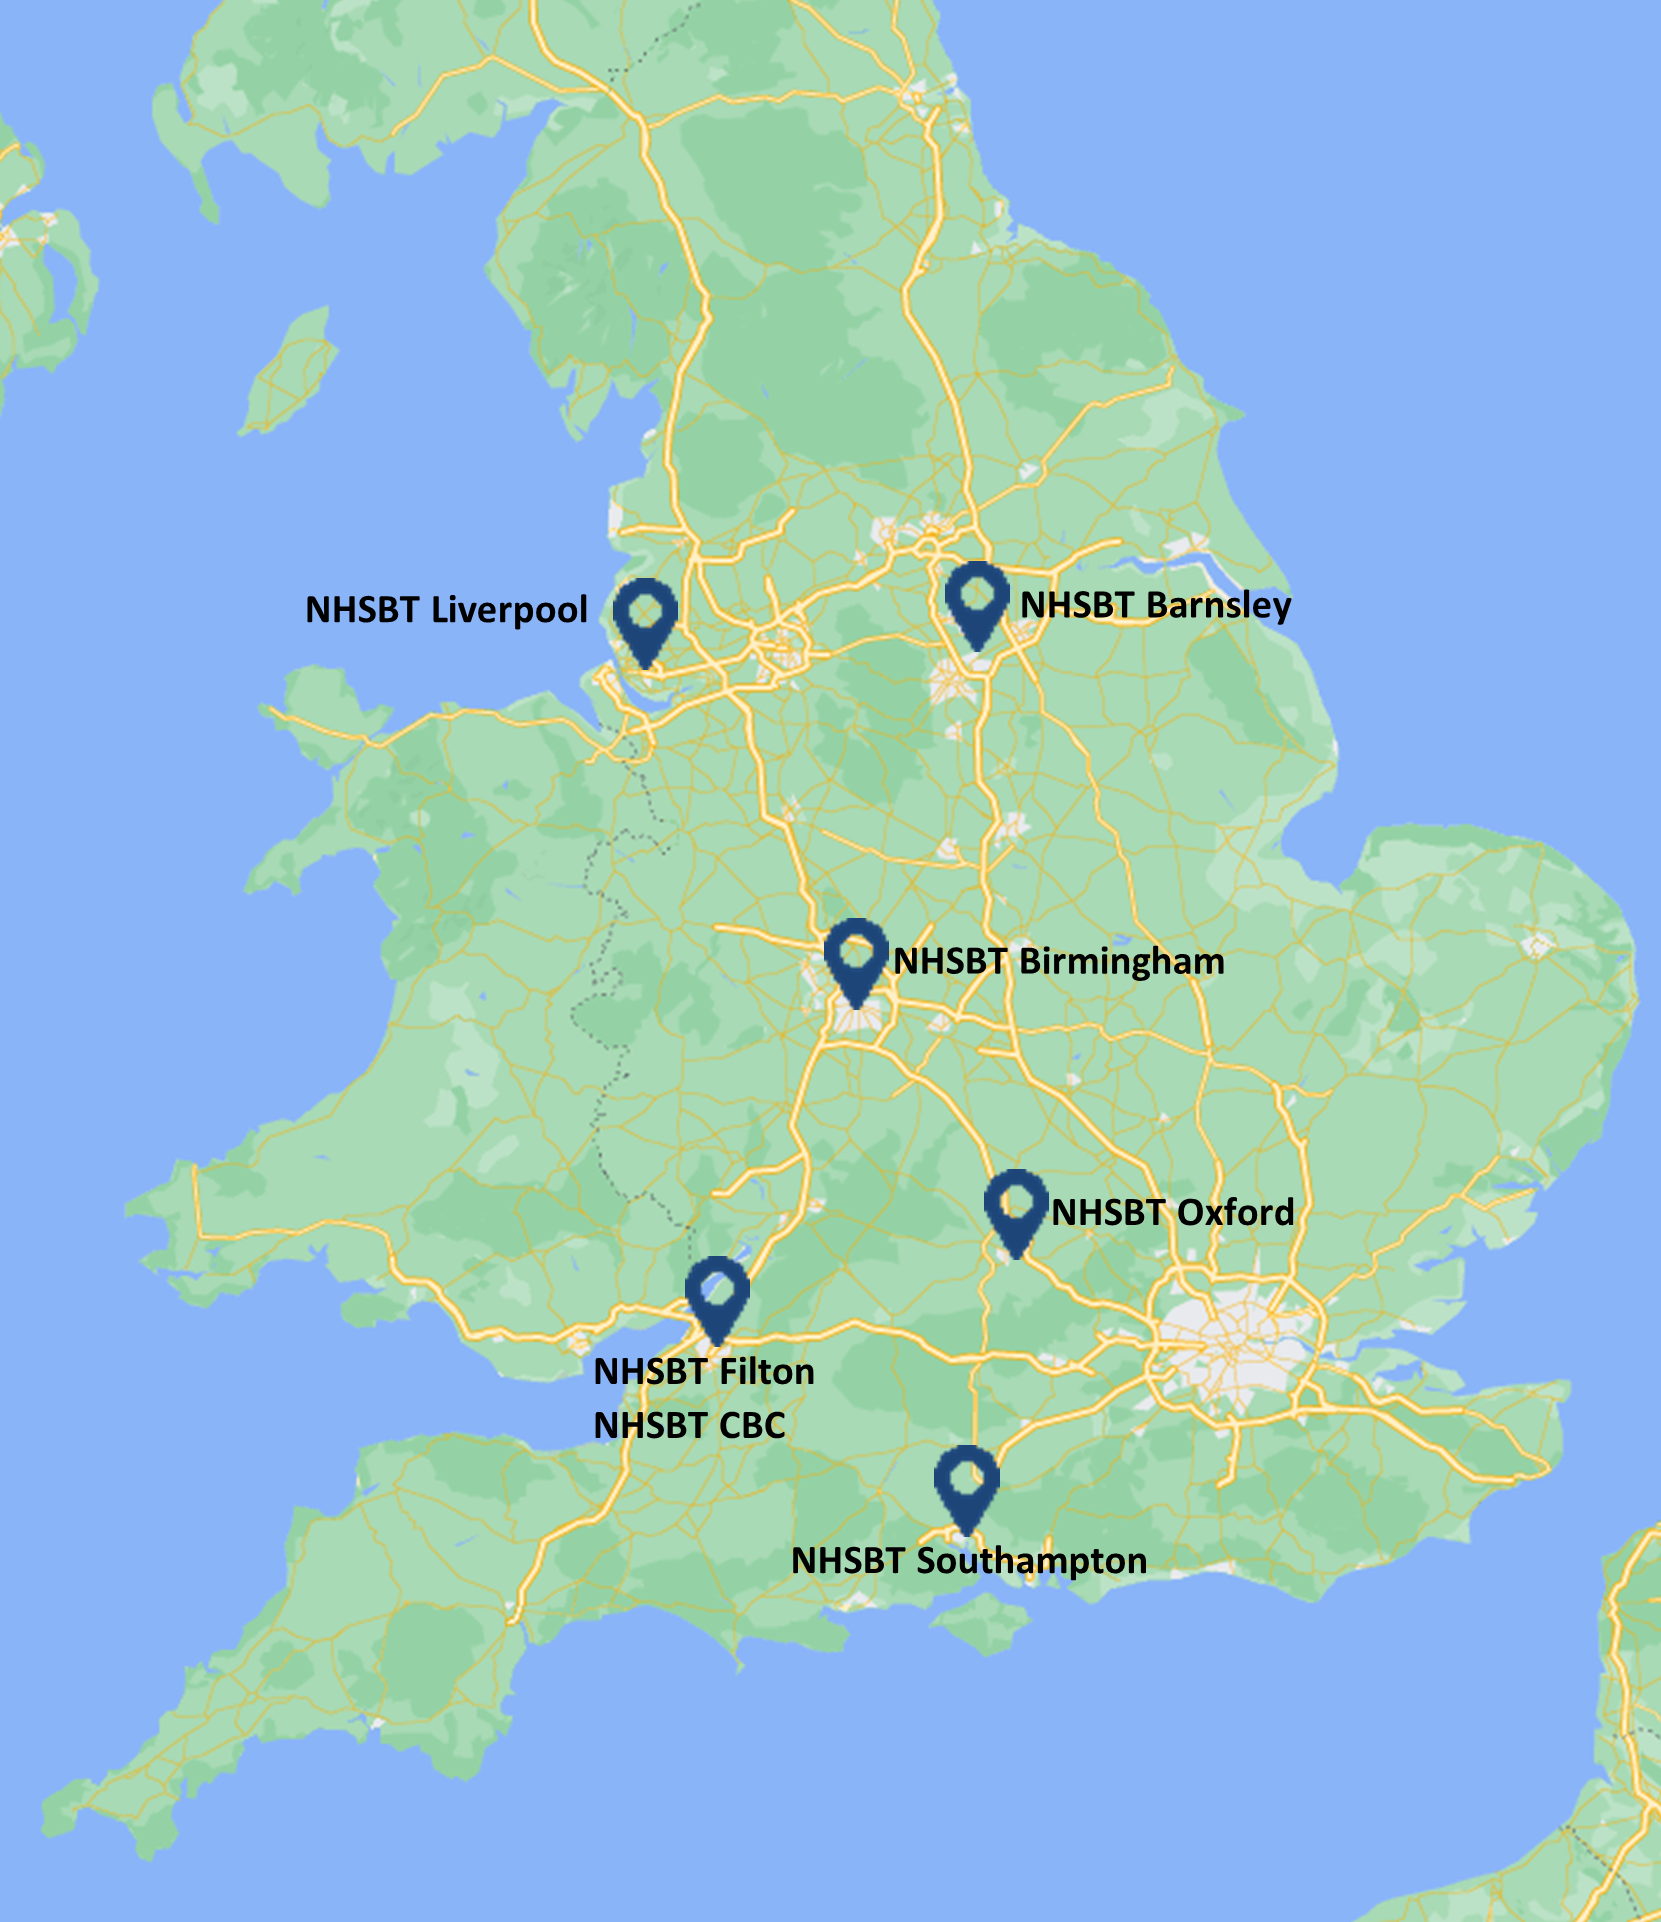 Map showing NHSBT Cellular and Molecular Therapies UK locations